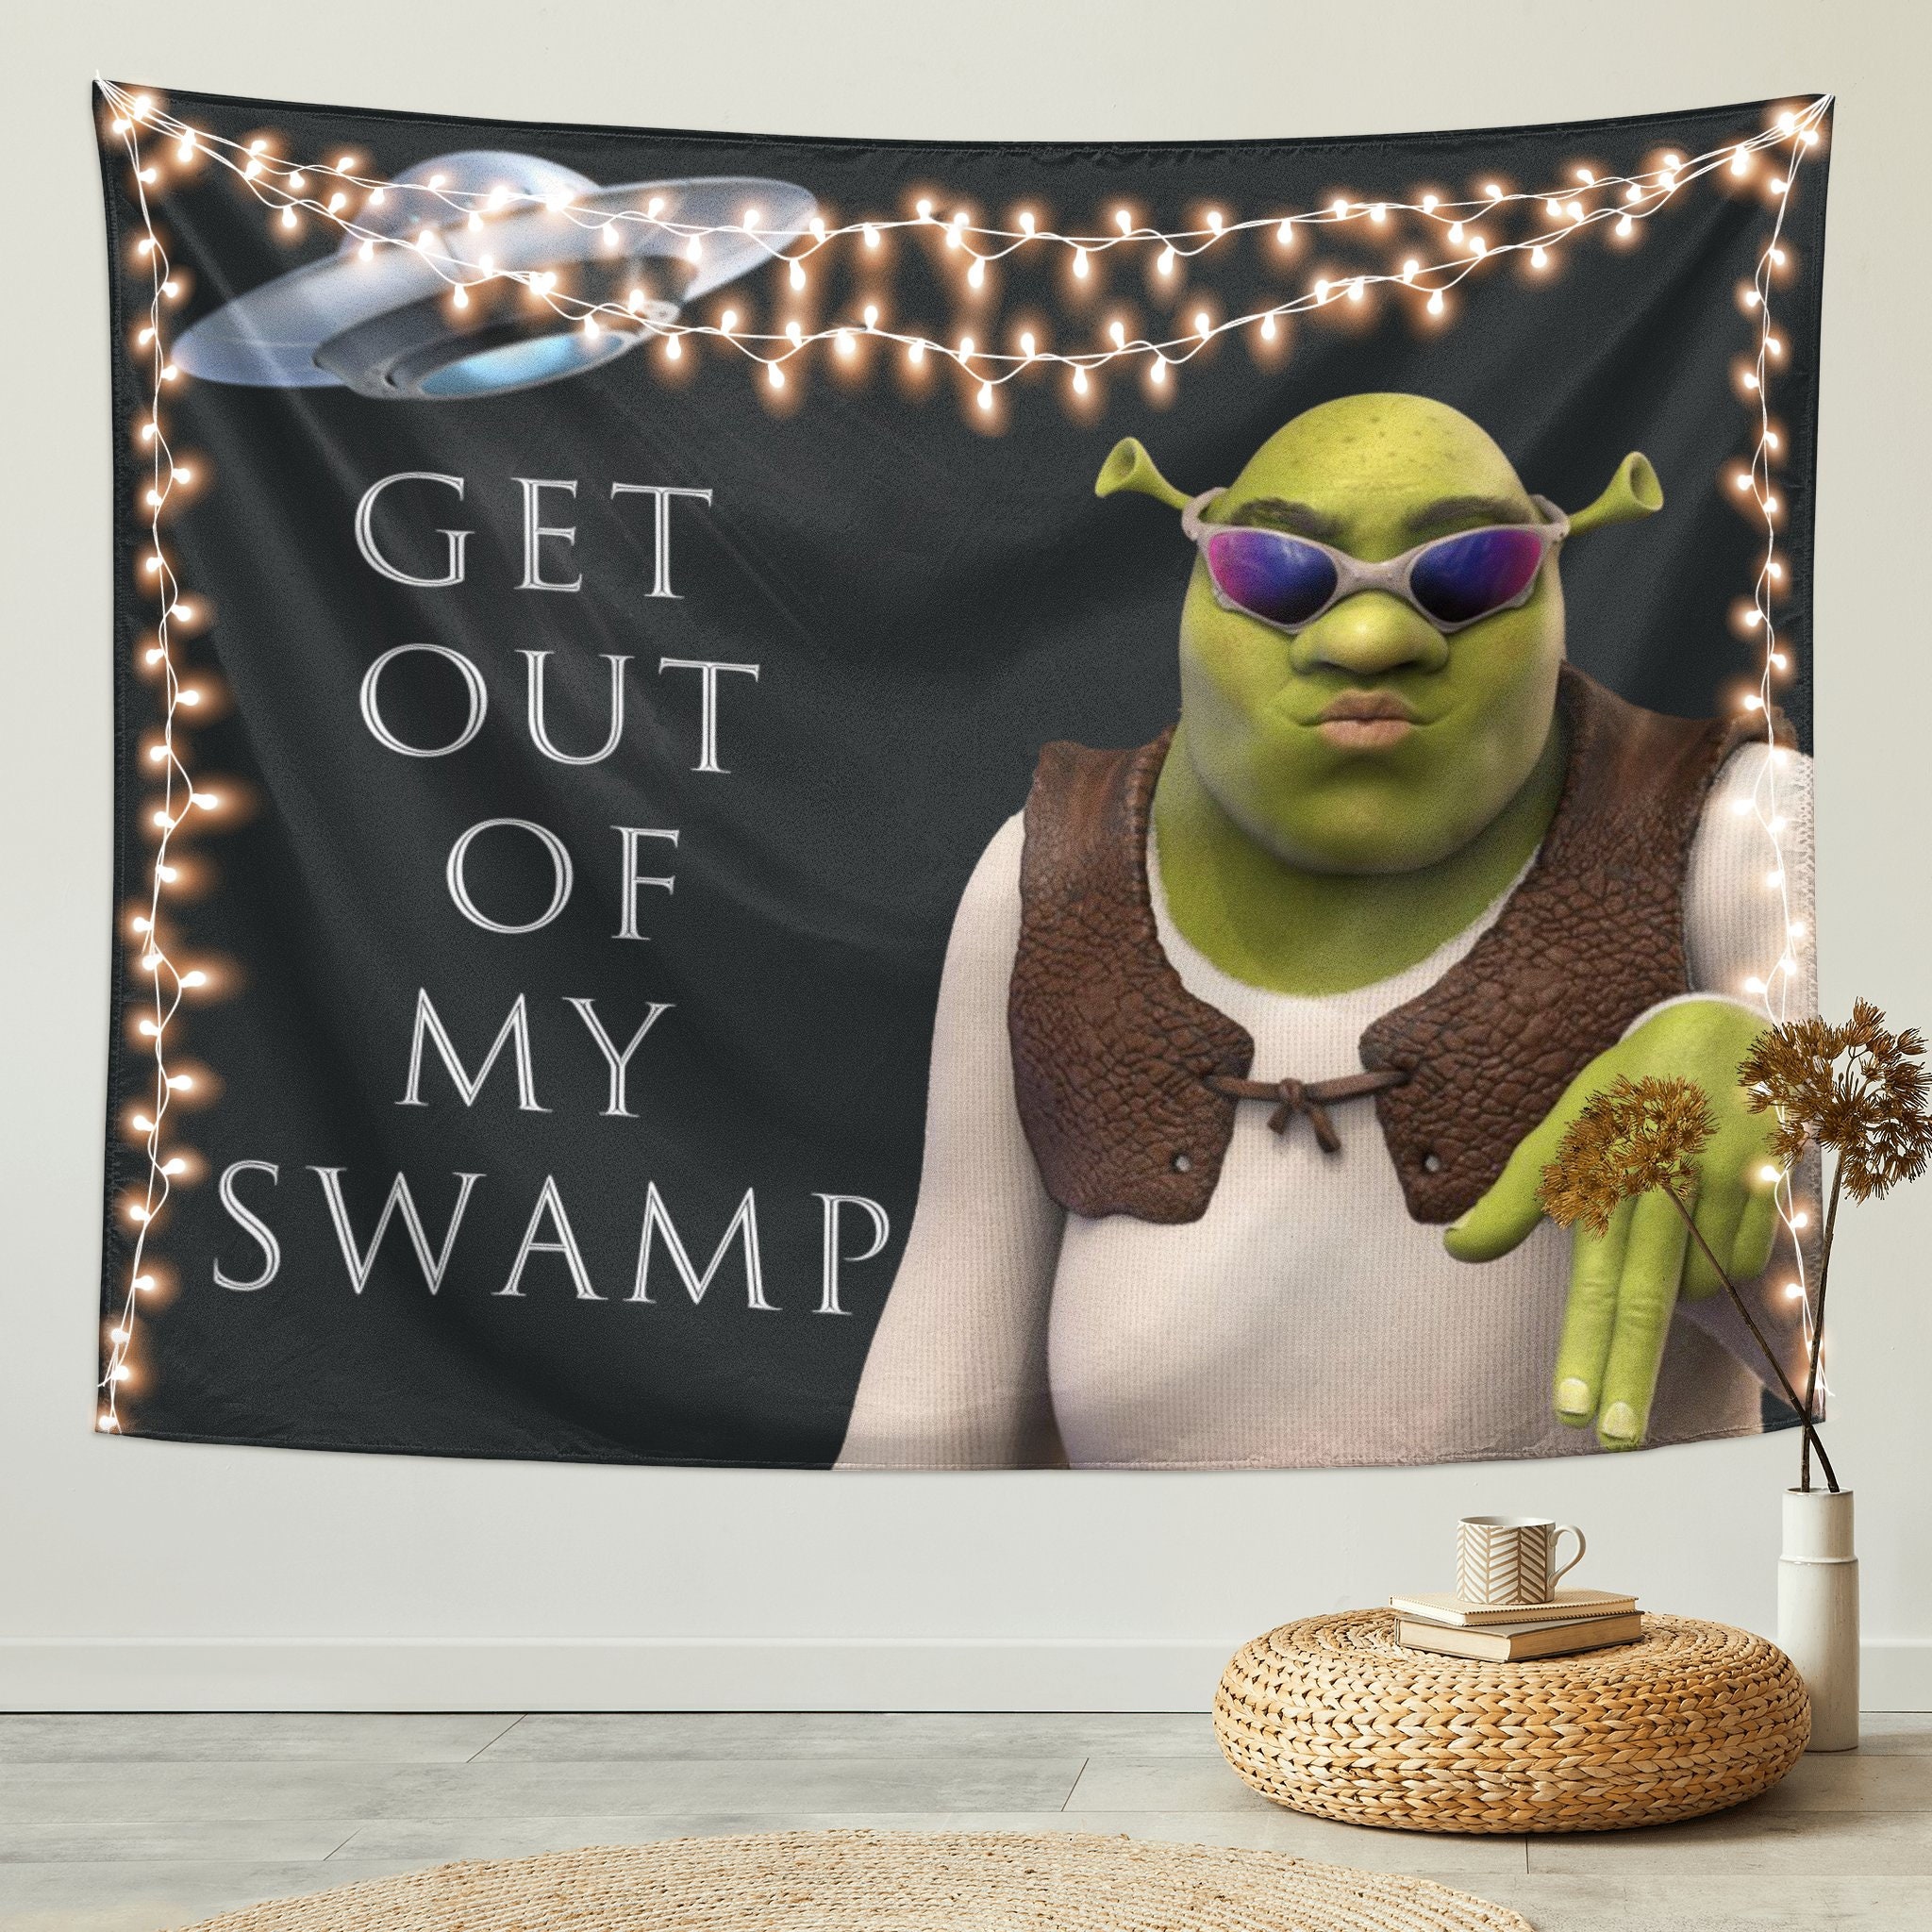 Get Out of My Swamp Meme Funny Tapestry Shrek Tapestries Wall